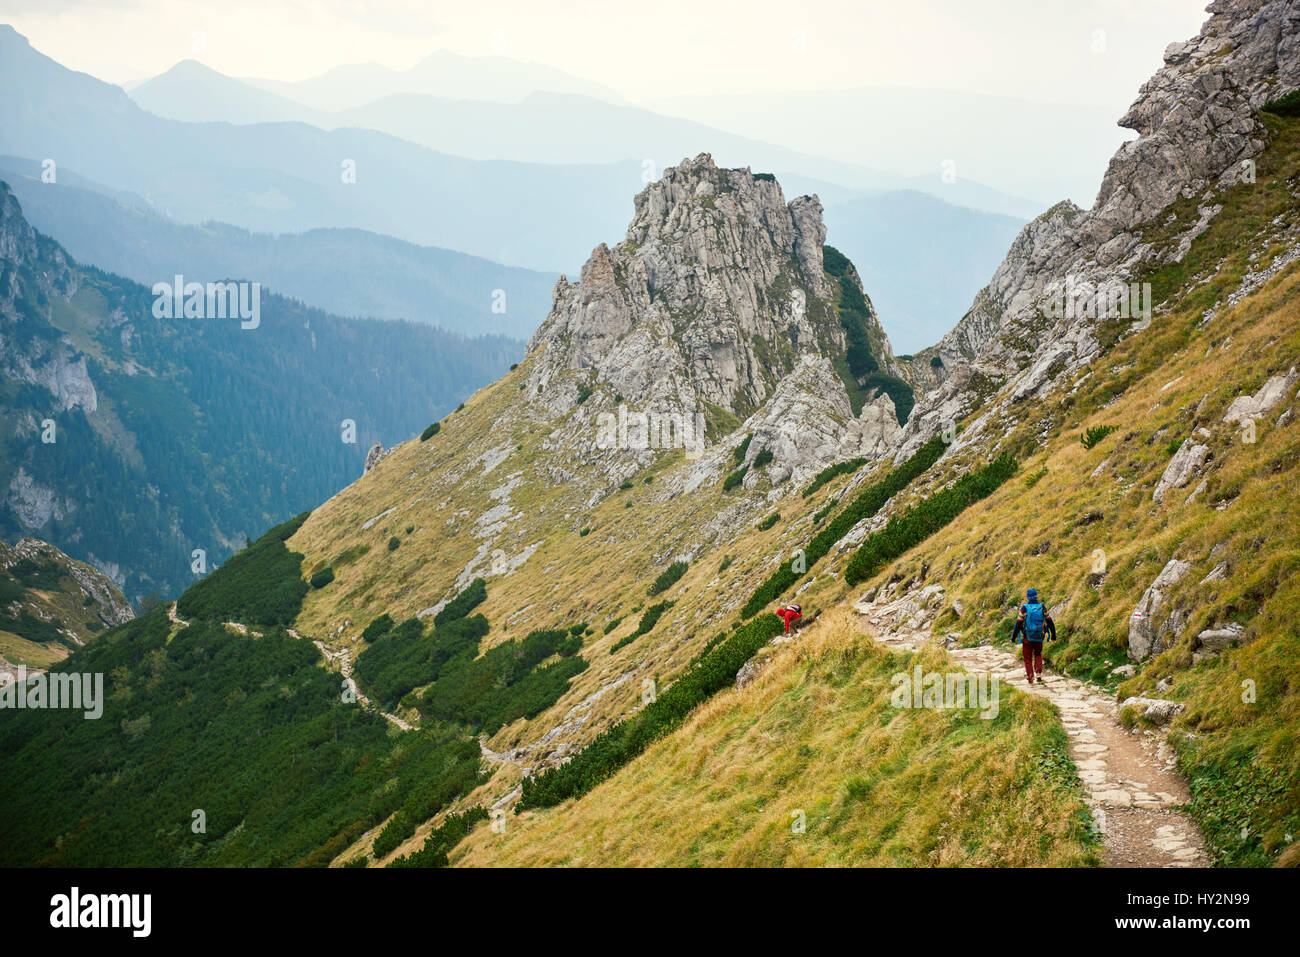 Two hikers walking along a trail in the mountains Stock Photo